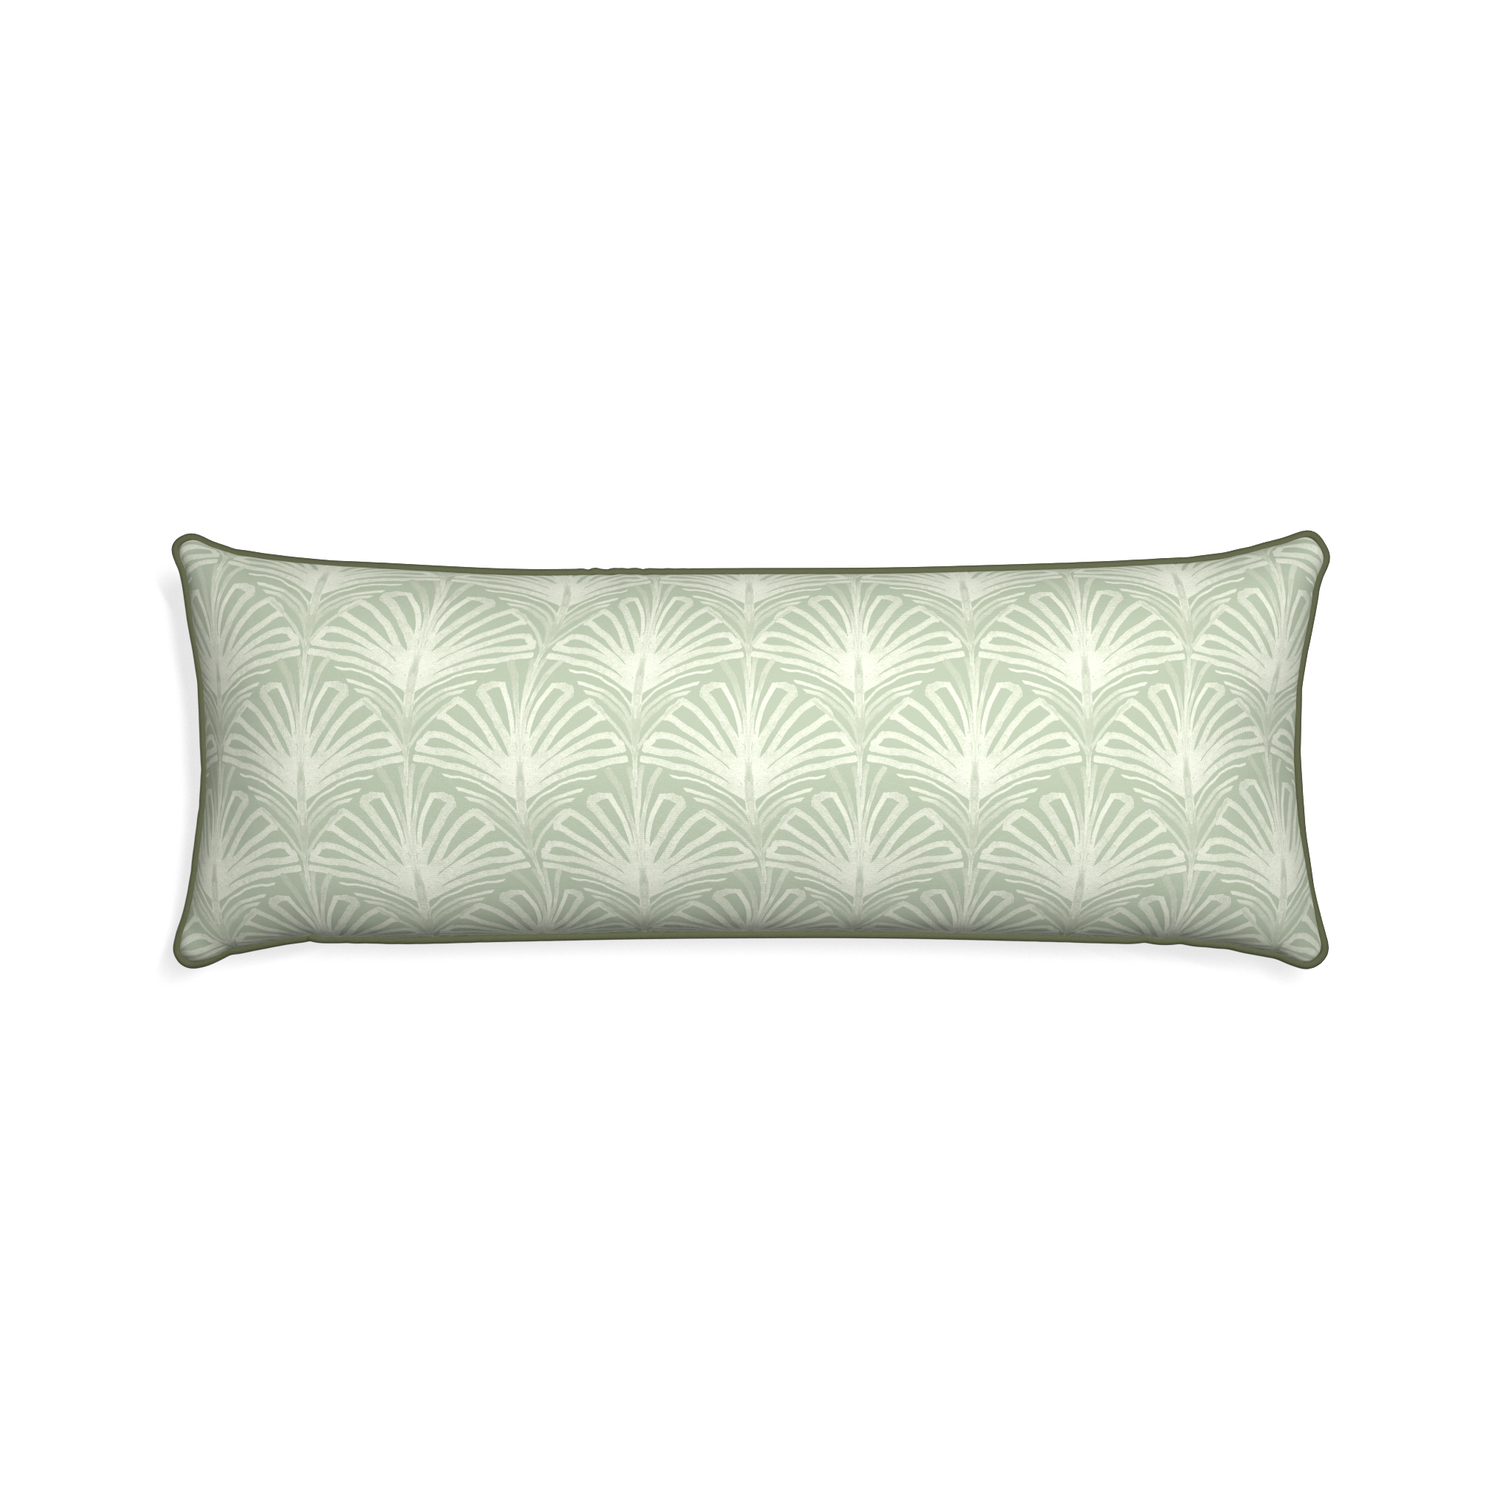 Xl-lumbar suzy sage custom pillow with f piping on white background